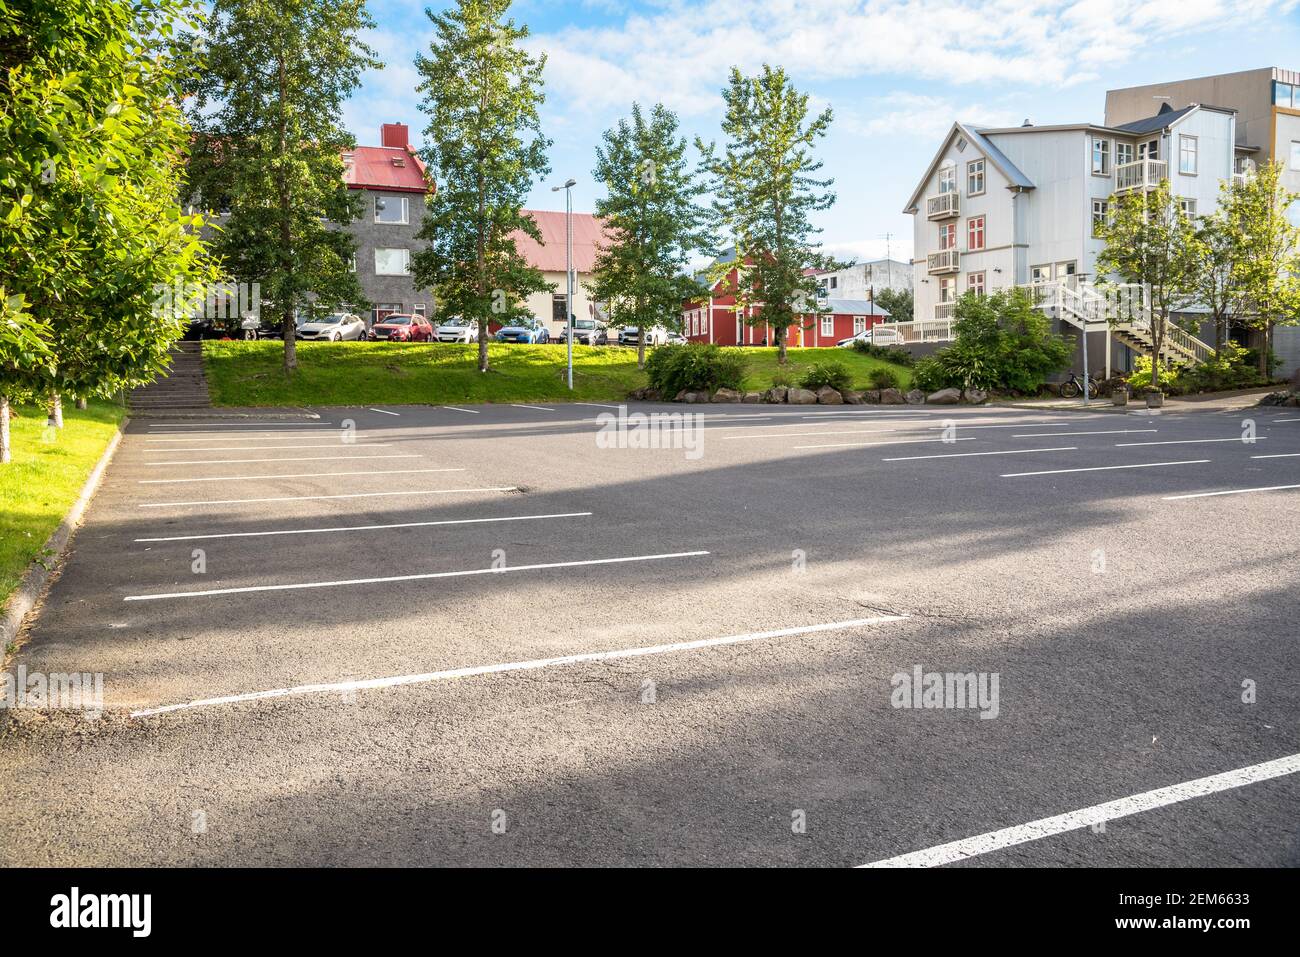 Deserted parking lot in a residentail district on a sunny summer evening Stock Photo